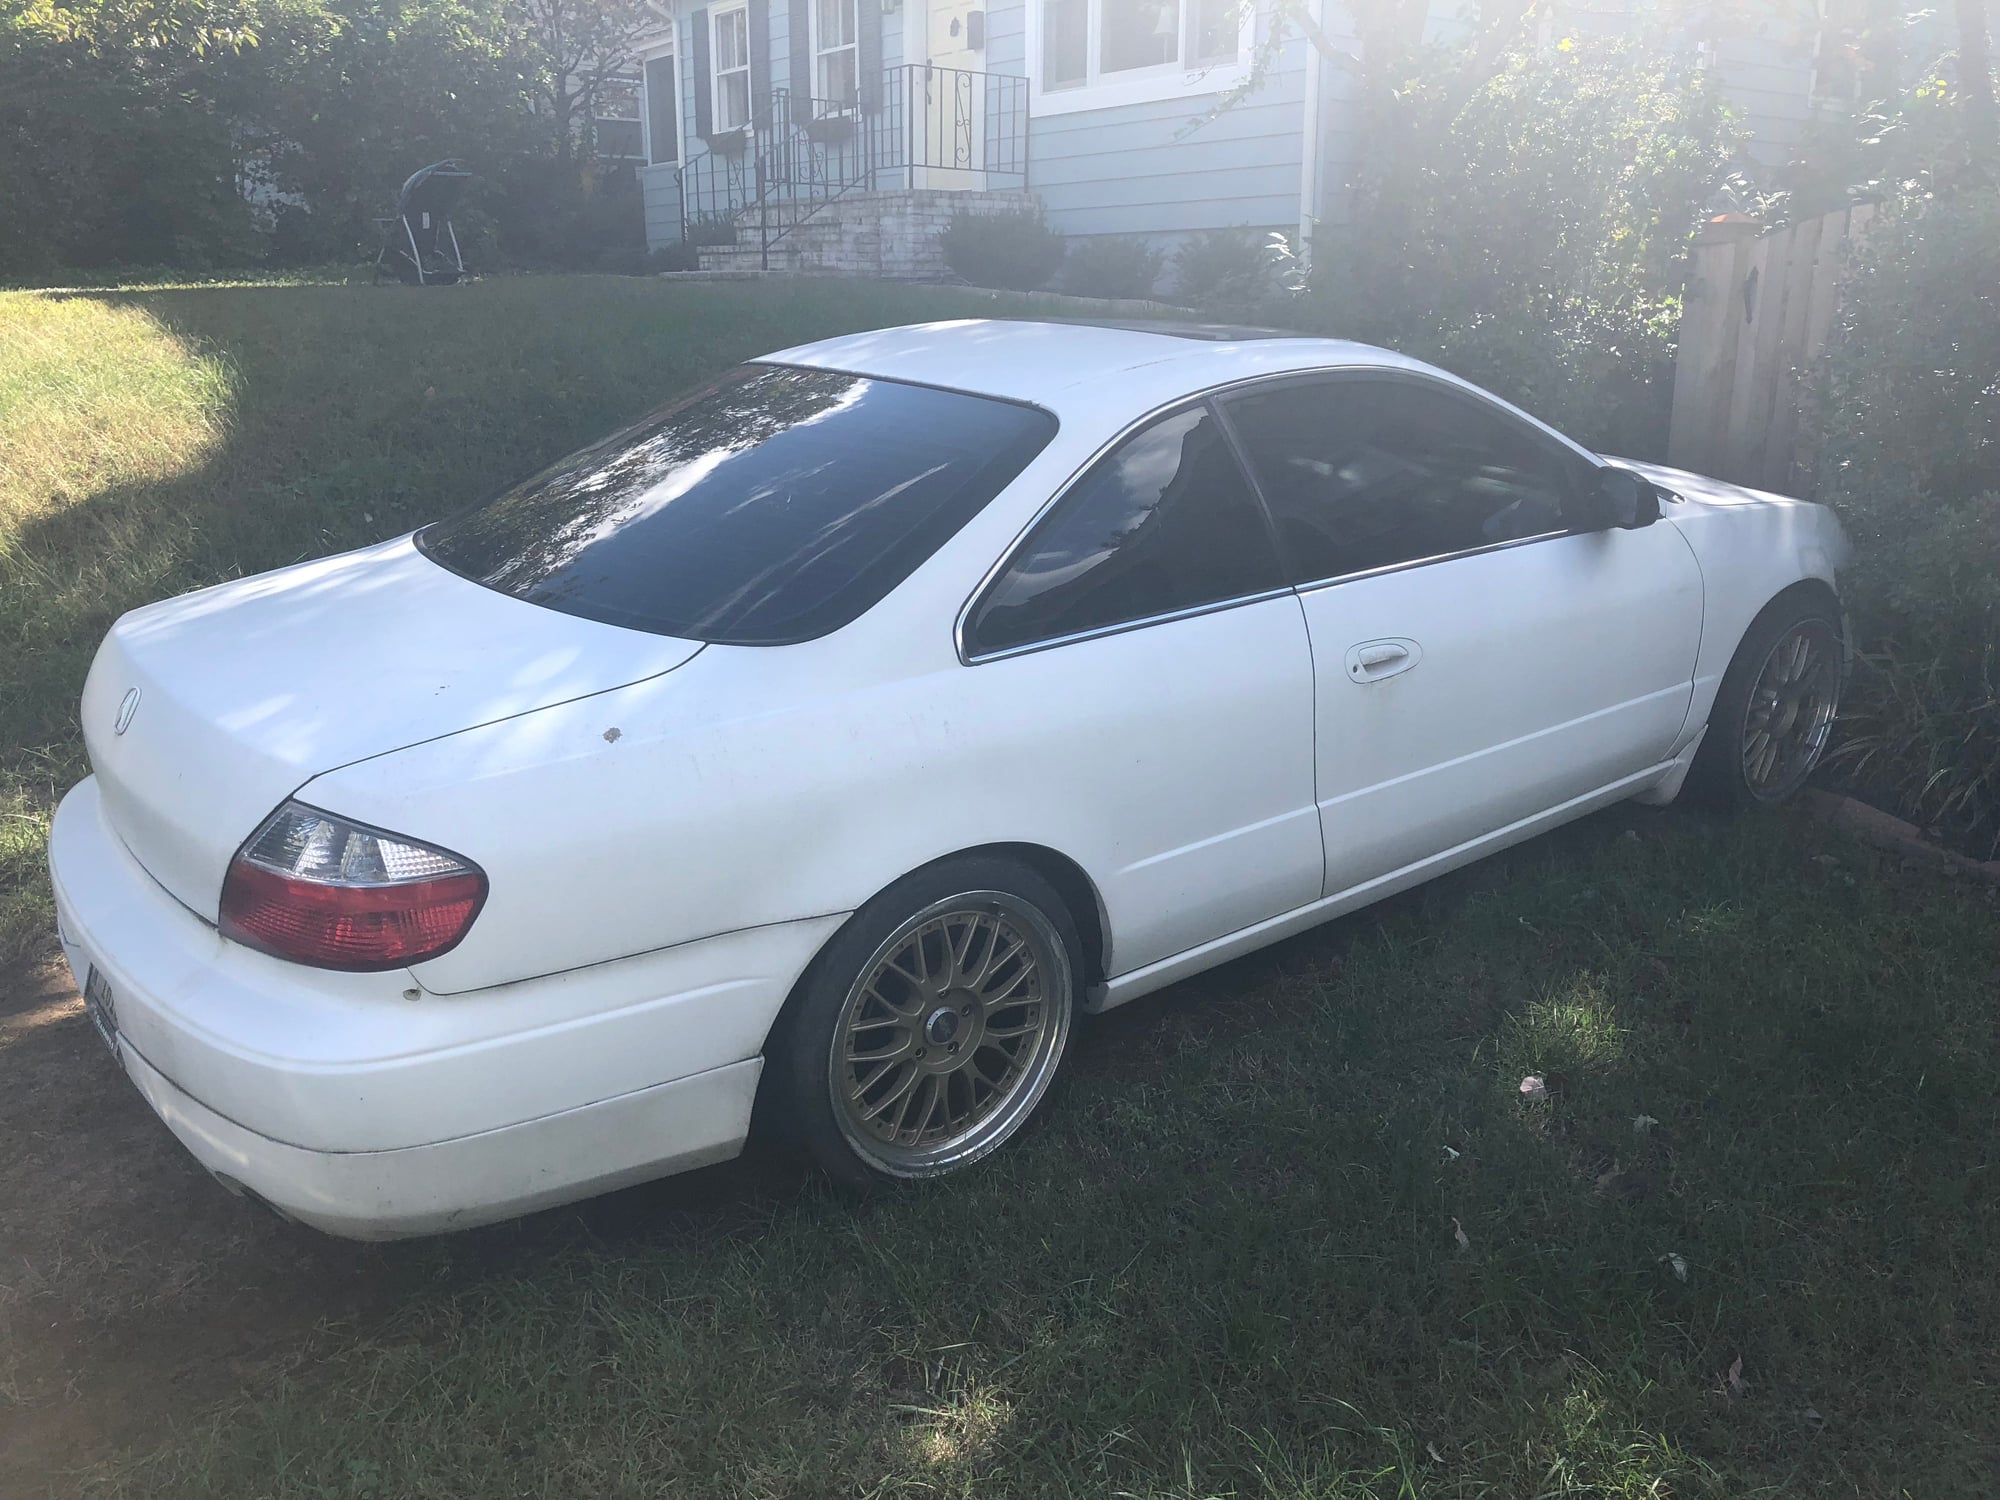 2002 Acura CL - FS: 2002 cl $3200 steal!! - Used - VIN 19UYA42642A000493 - 168,427 Miles - 6 cyl - 2WD - Automatic - Coupe - White - Annapolis, MD 21401, United States